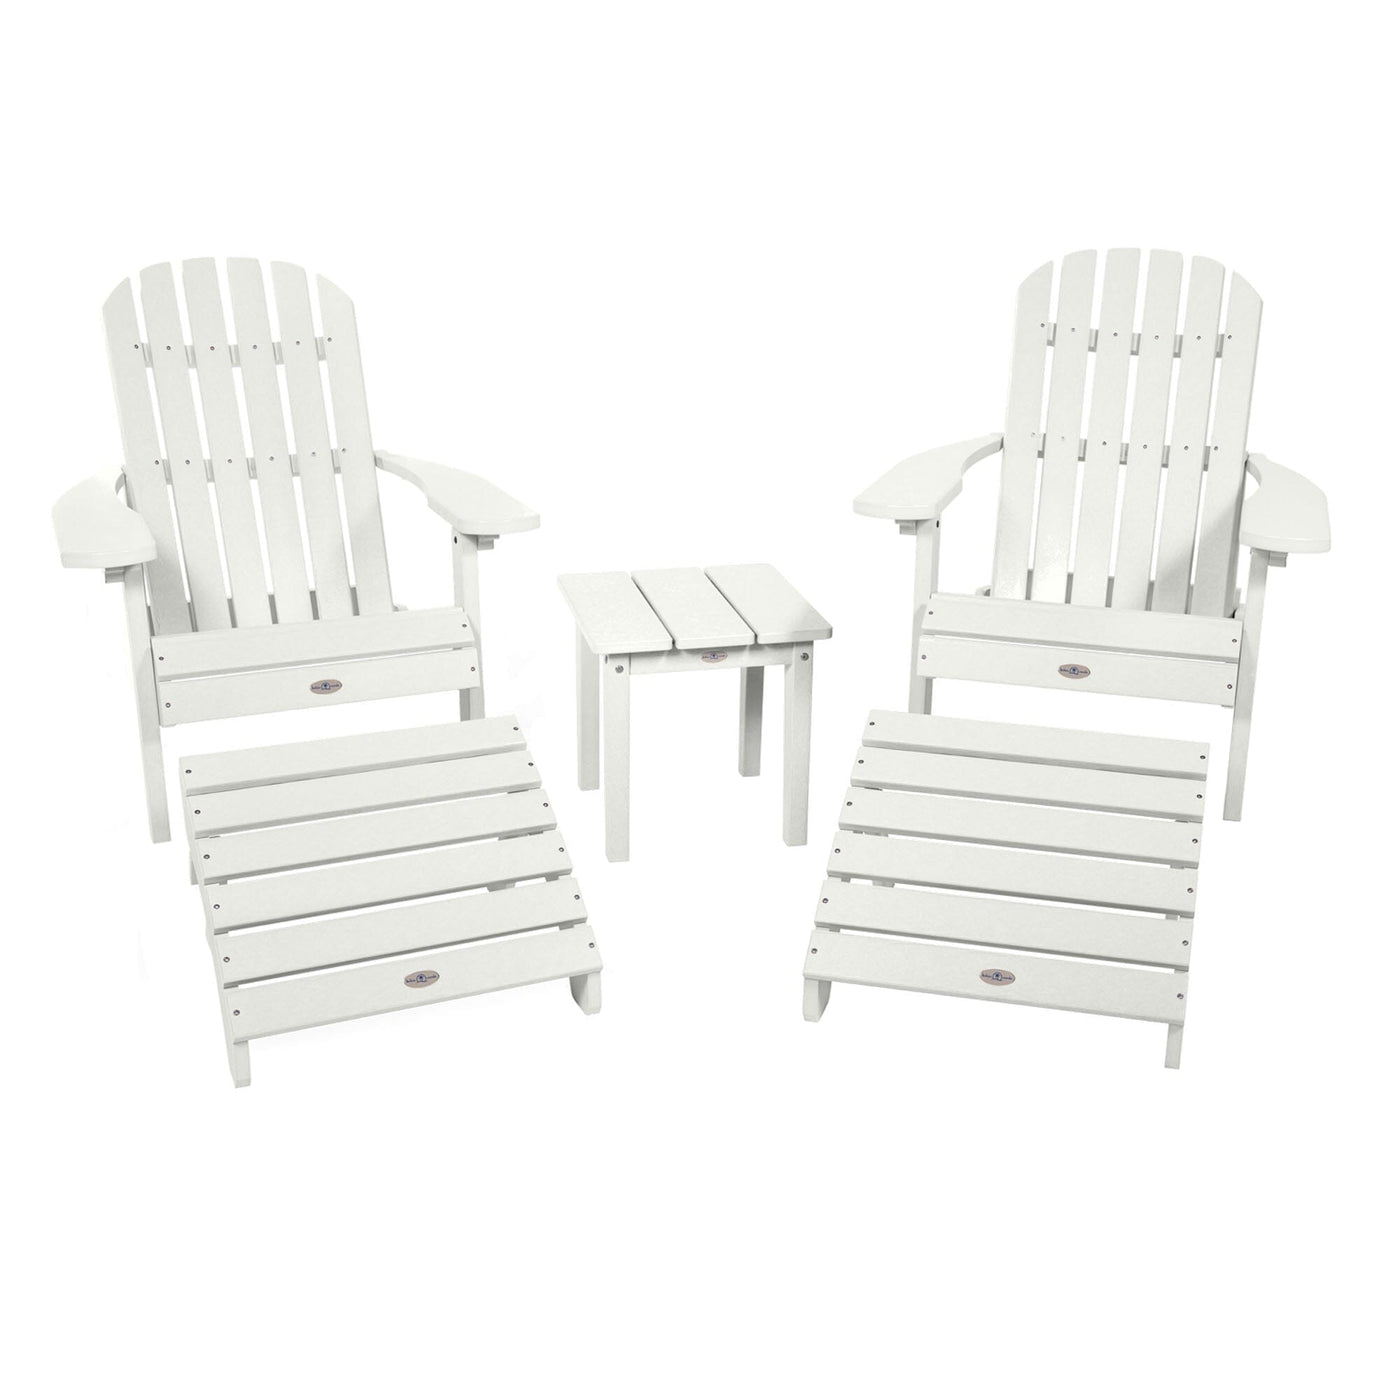 2 Cape Folding Adirondacks, 2 Ottomans, and 1 Side Table Kitted Set Bahia Verde Outdoors Coconut White 